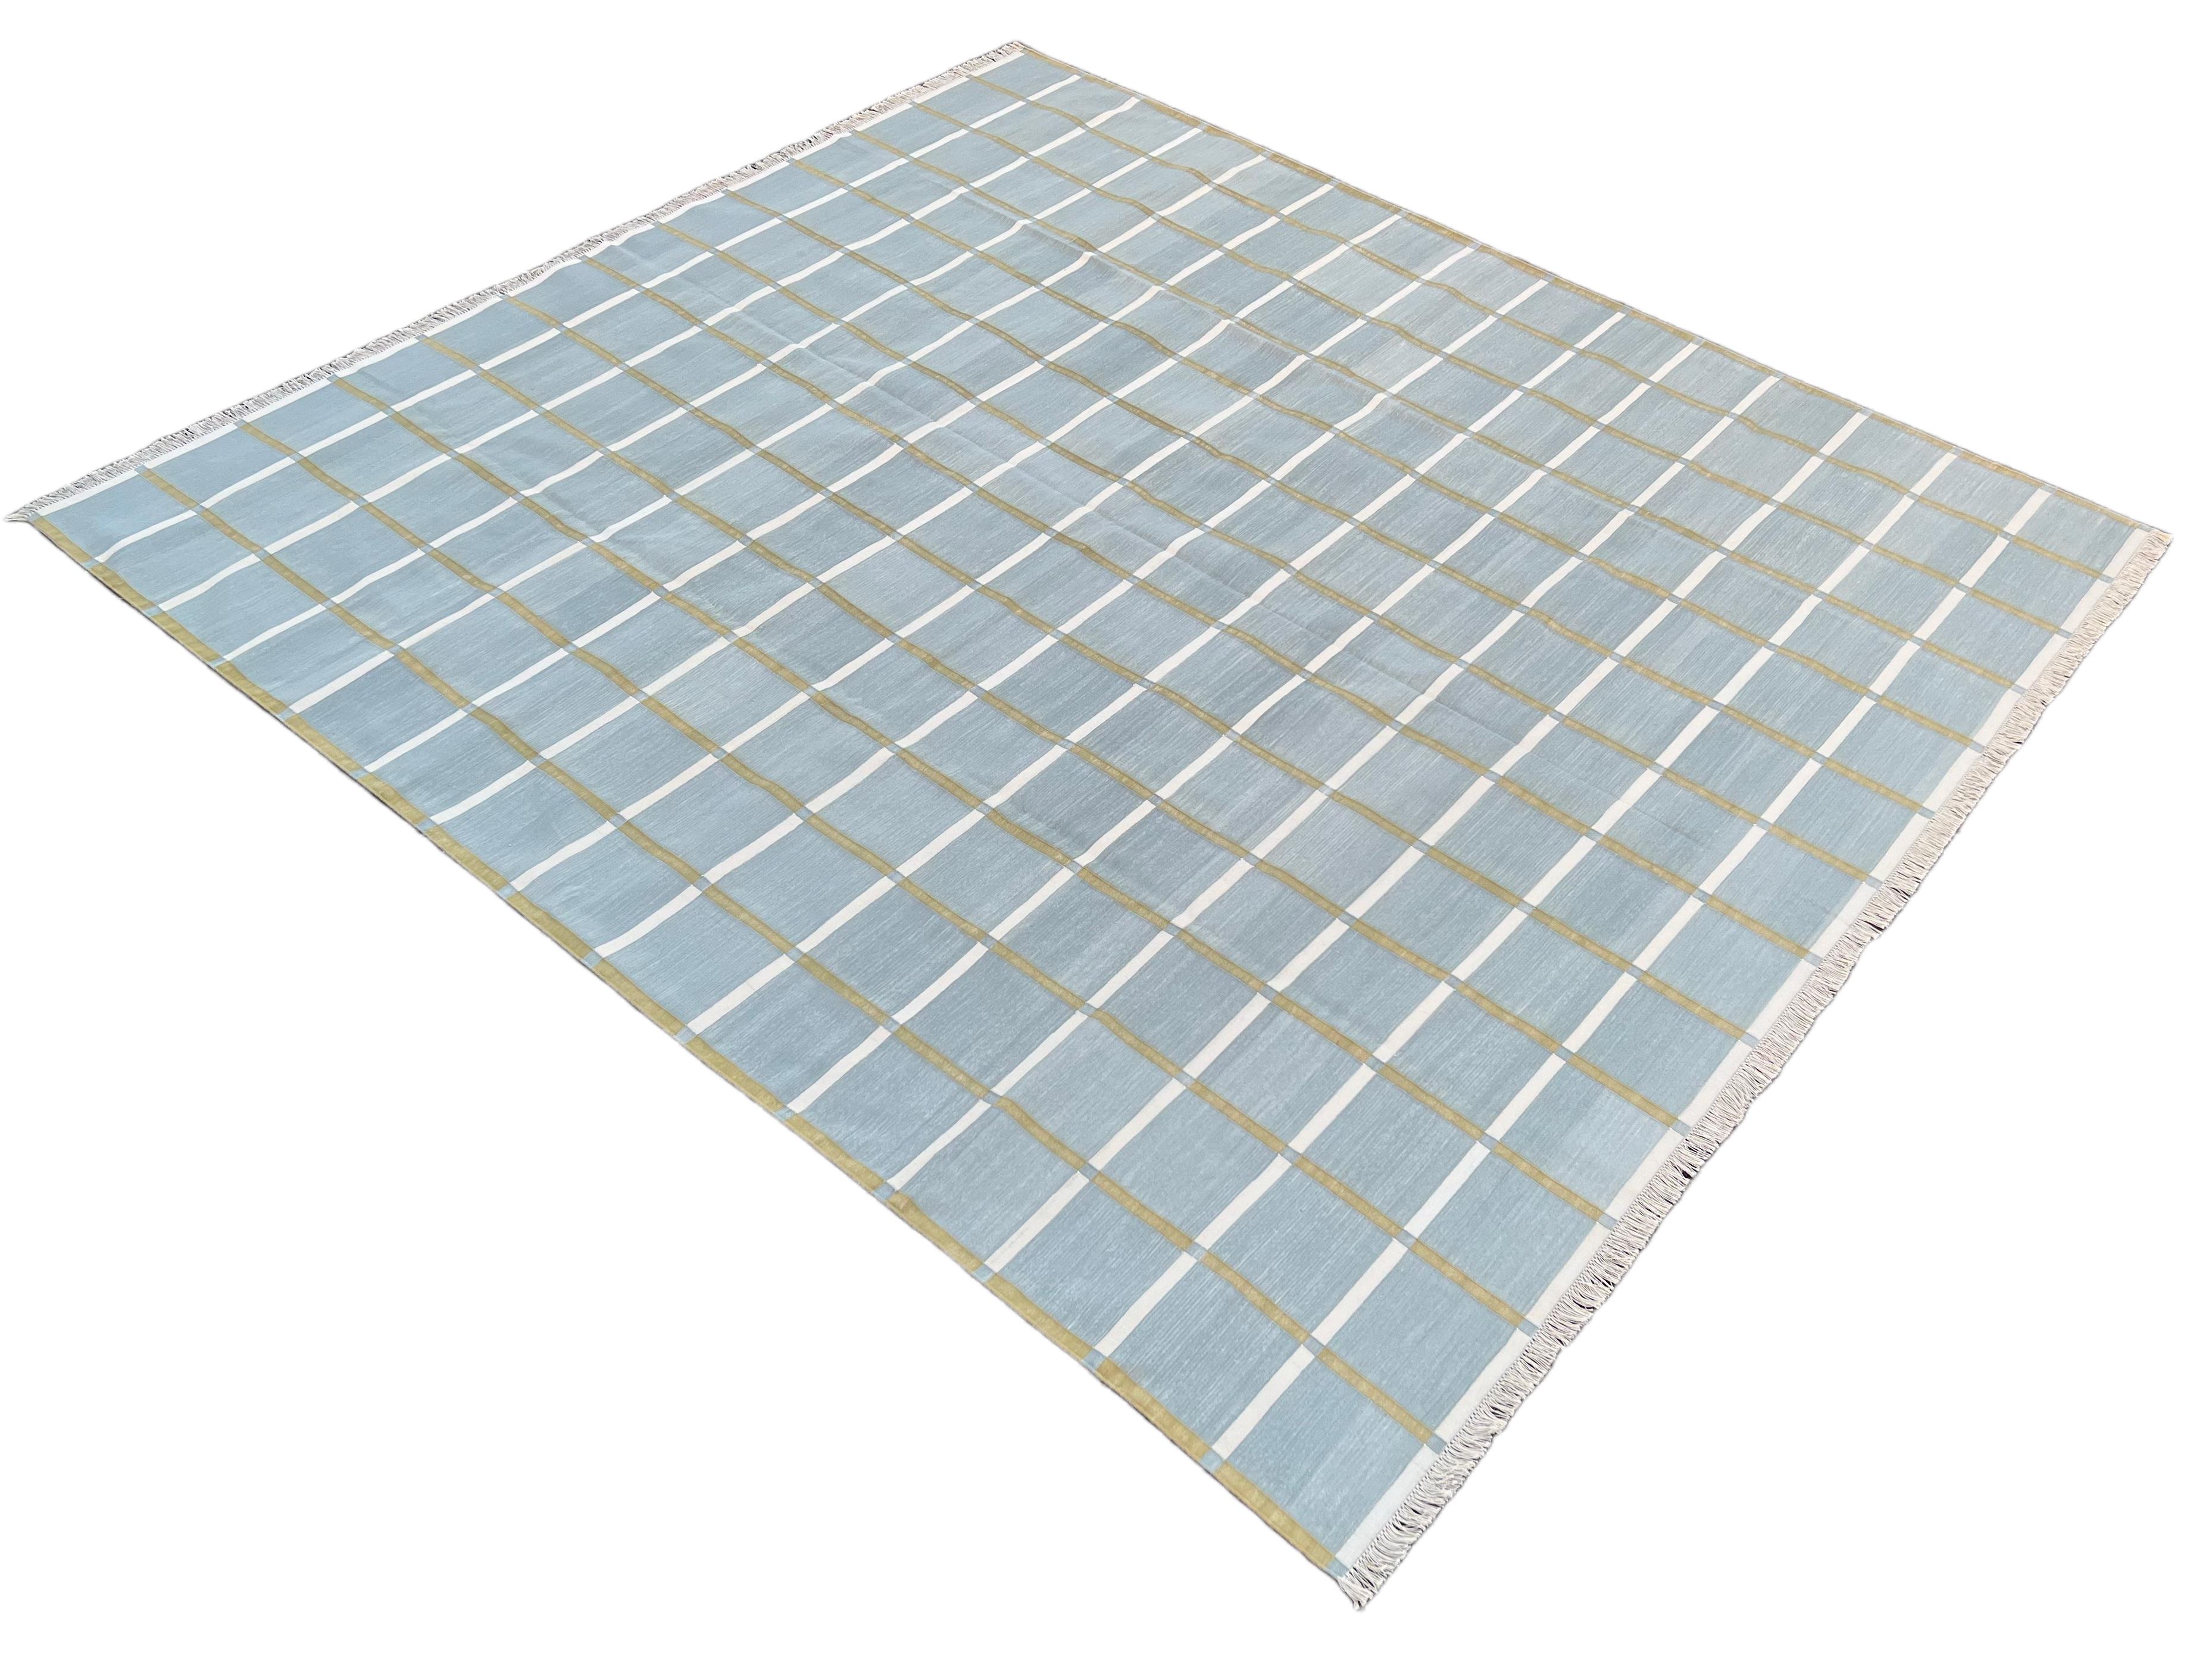 Cotton Vegetable Dyed Area Rug, Grey, Cream And Olive Green Windowpane Checked Indian Rug-9'x12'

These special flat-weave dhurries are hand-woven with 15 ply 100% cotton yarn. Due to the special manufacturing techniques used to create our rugs, the